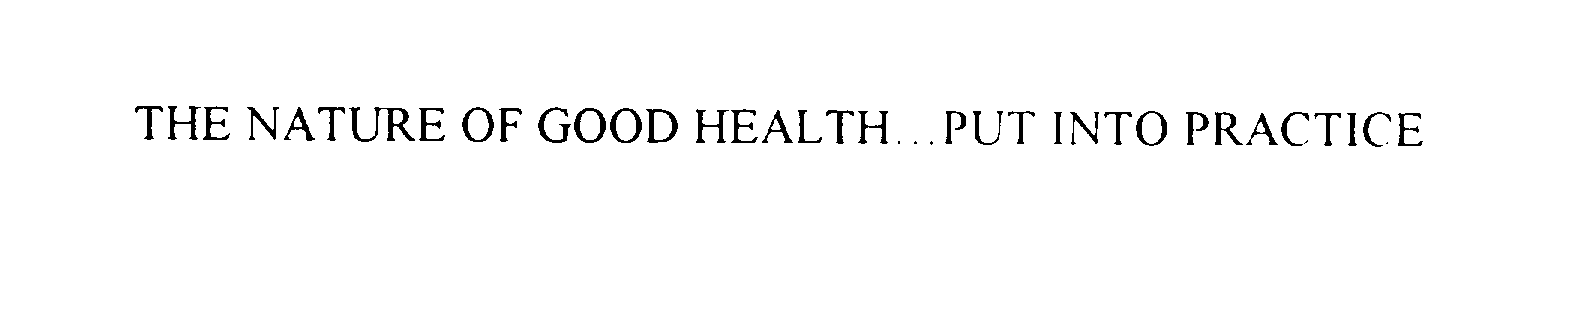  THE NATURE OF GOOD HEALTH... PUT INTO PRACTICE